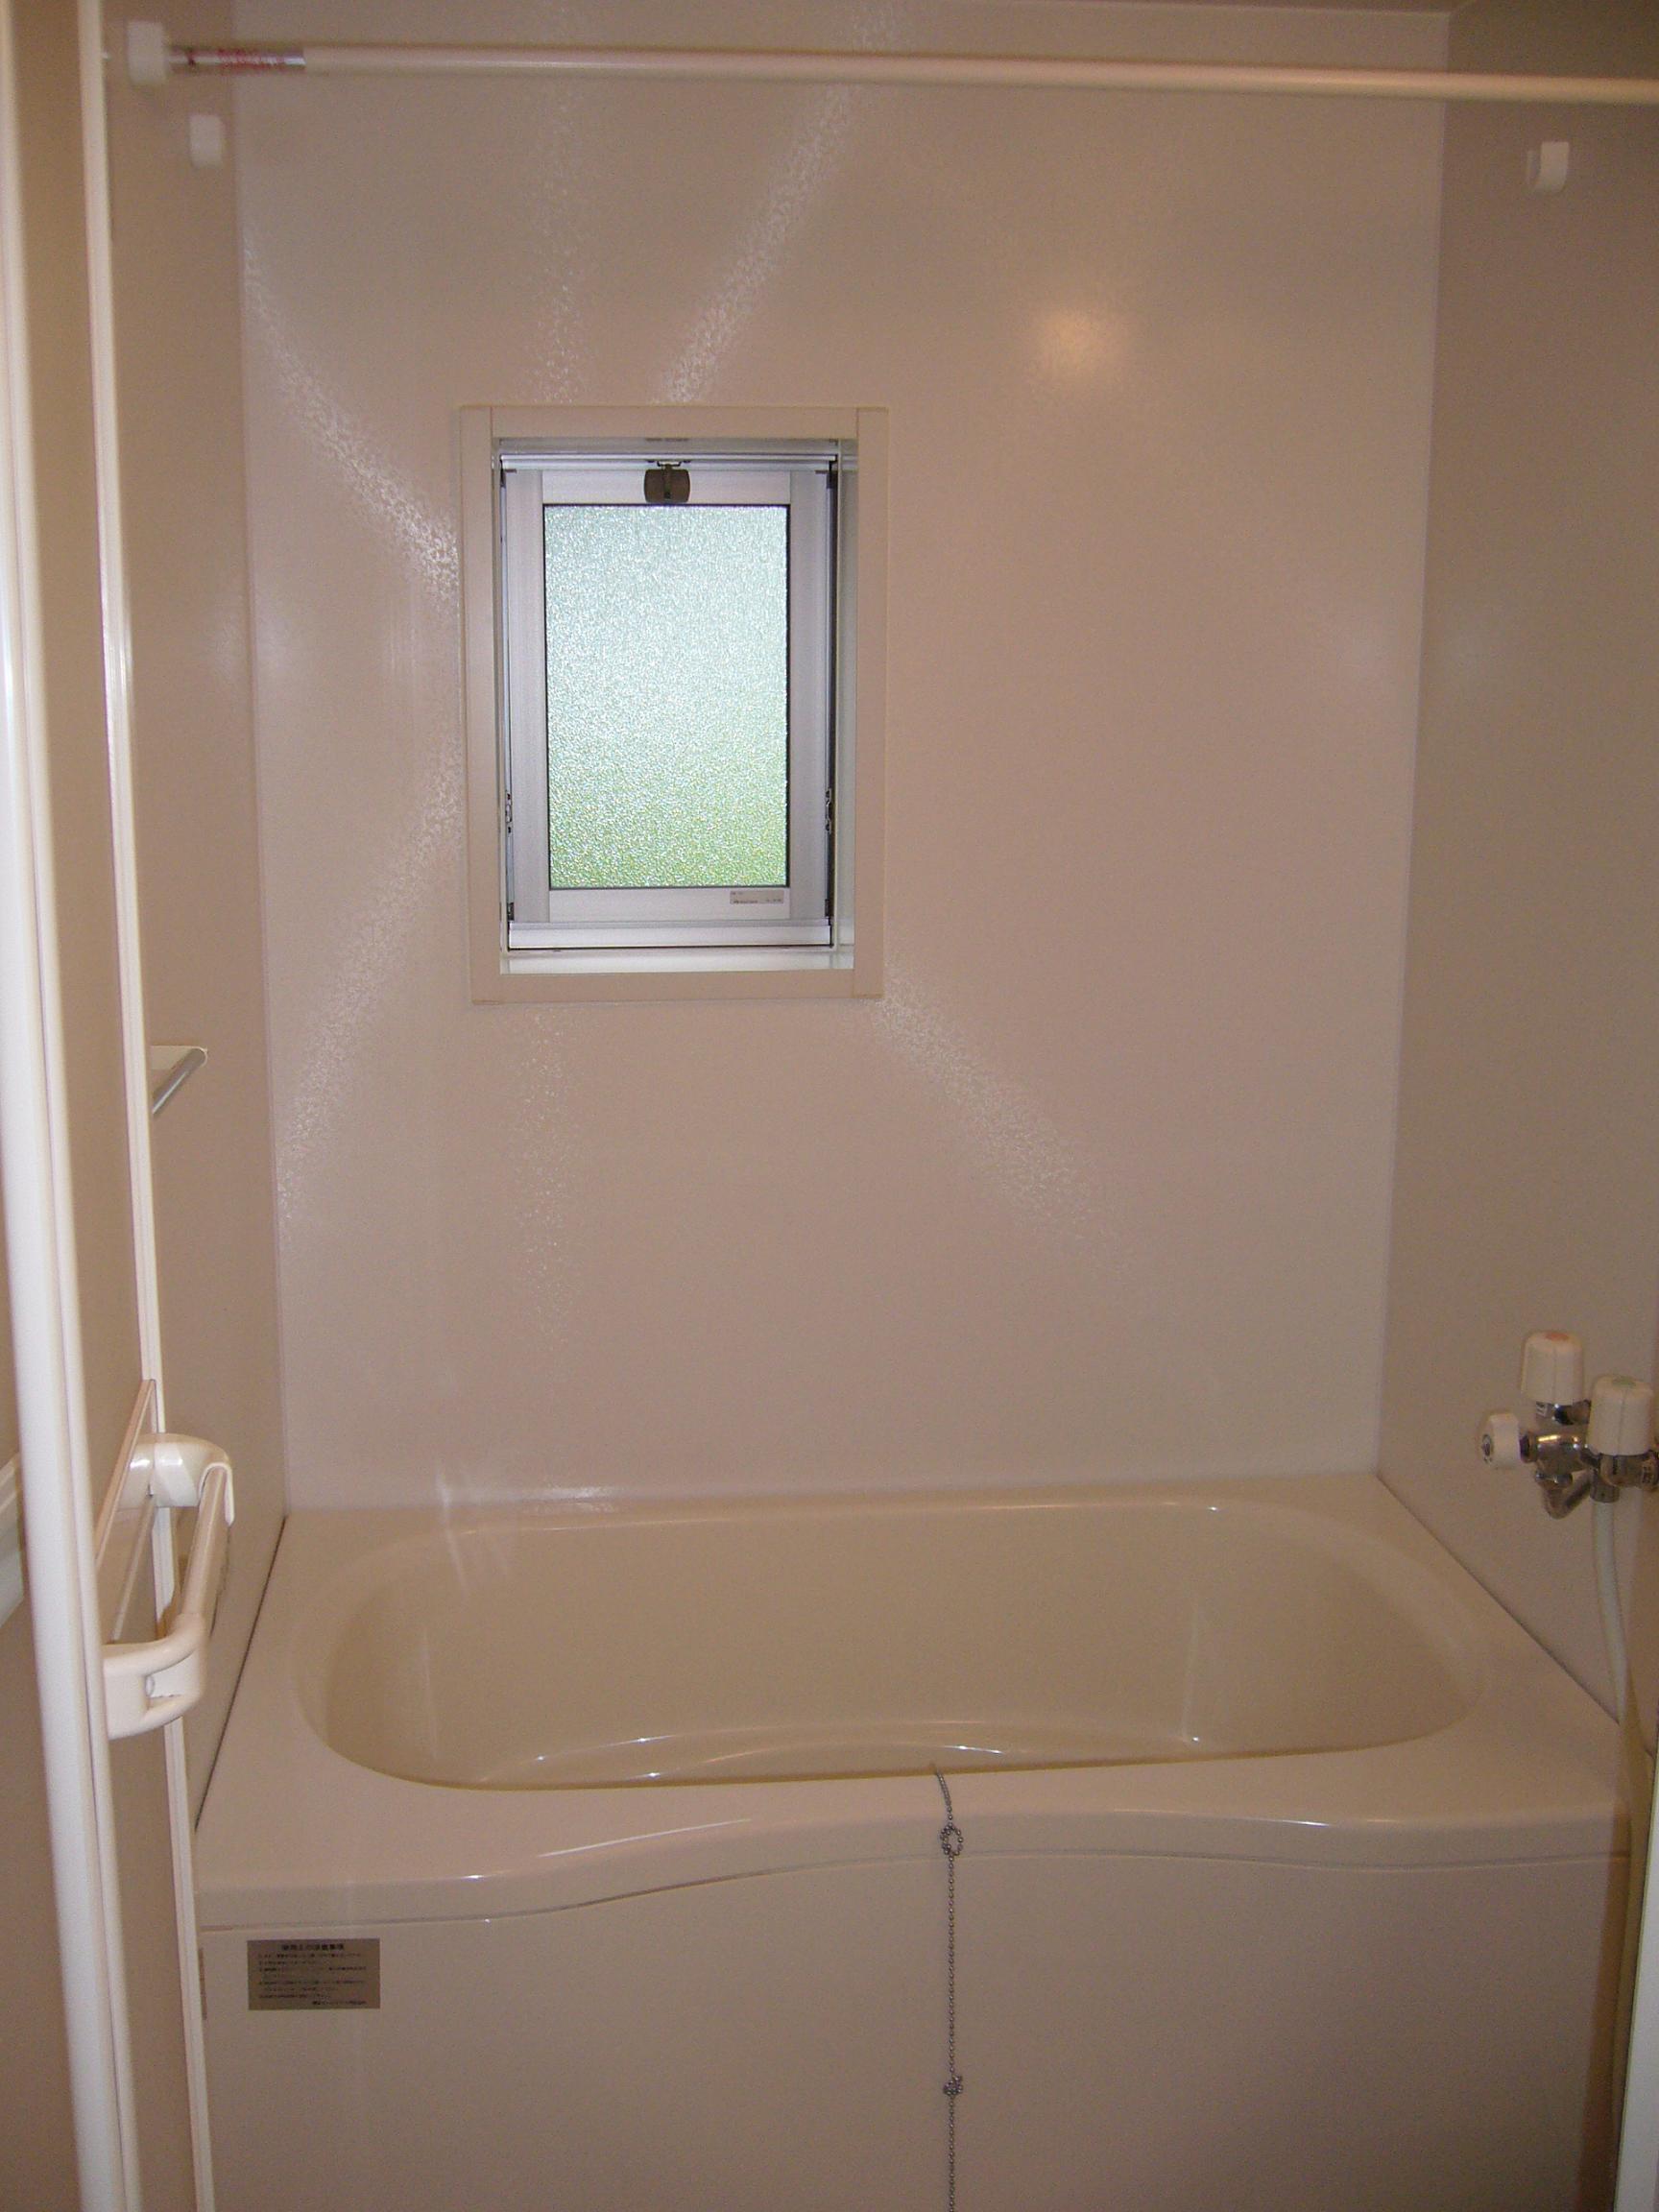 Bath. Ventilation is also possible bright there is a window,